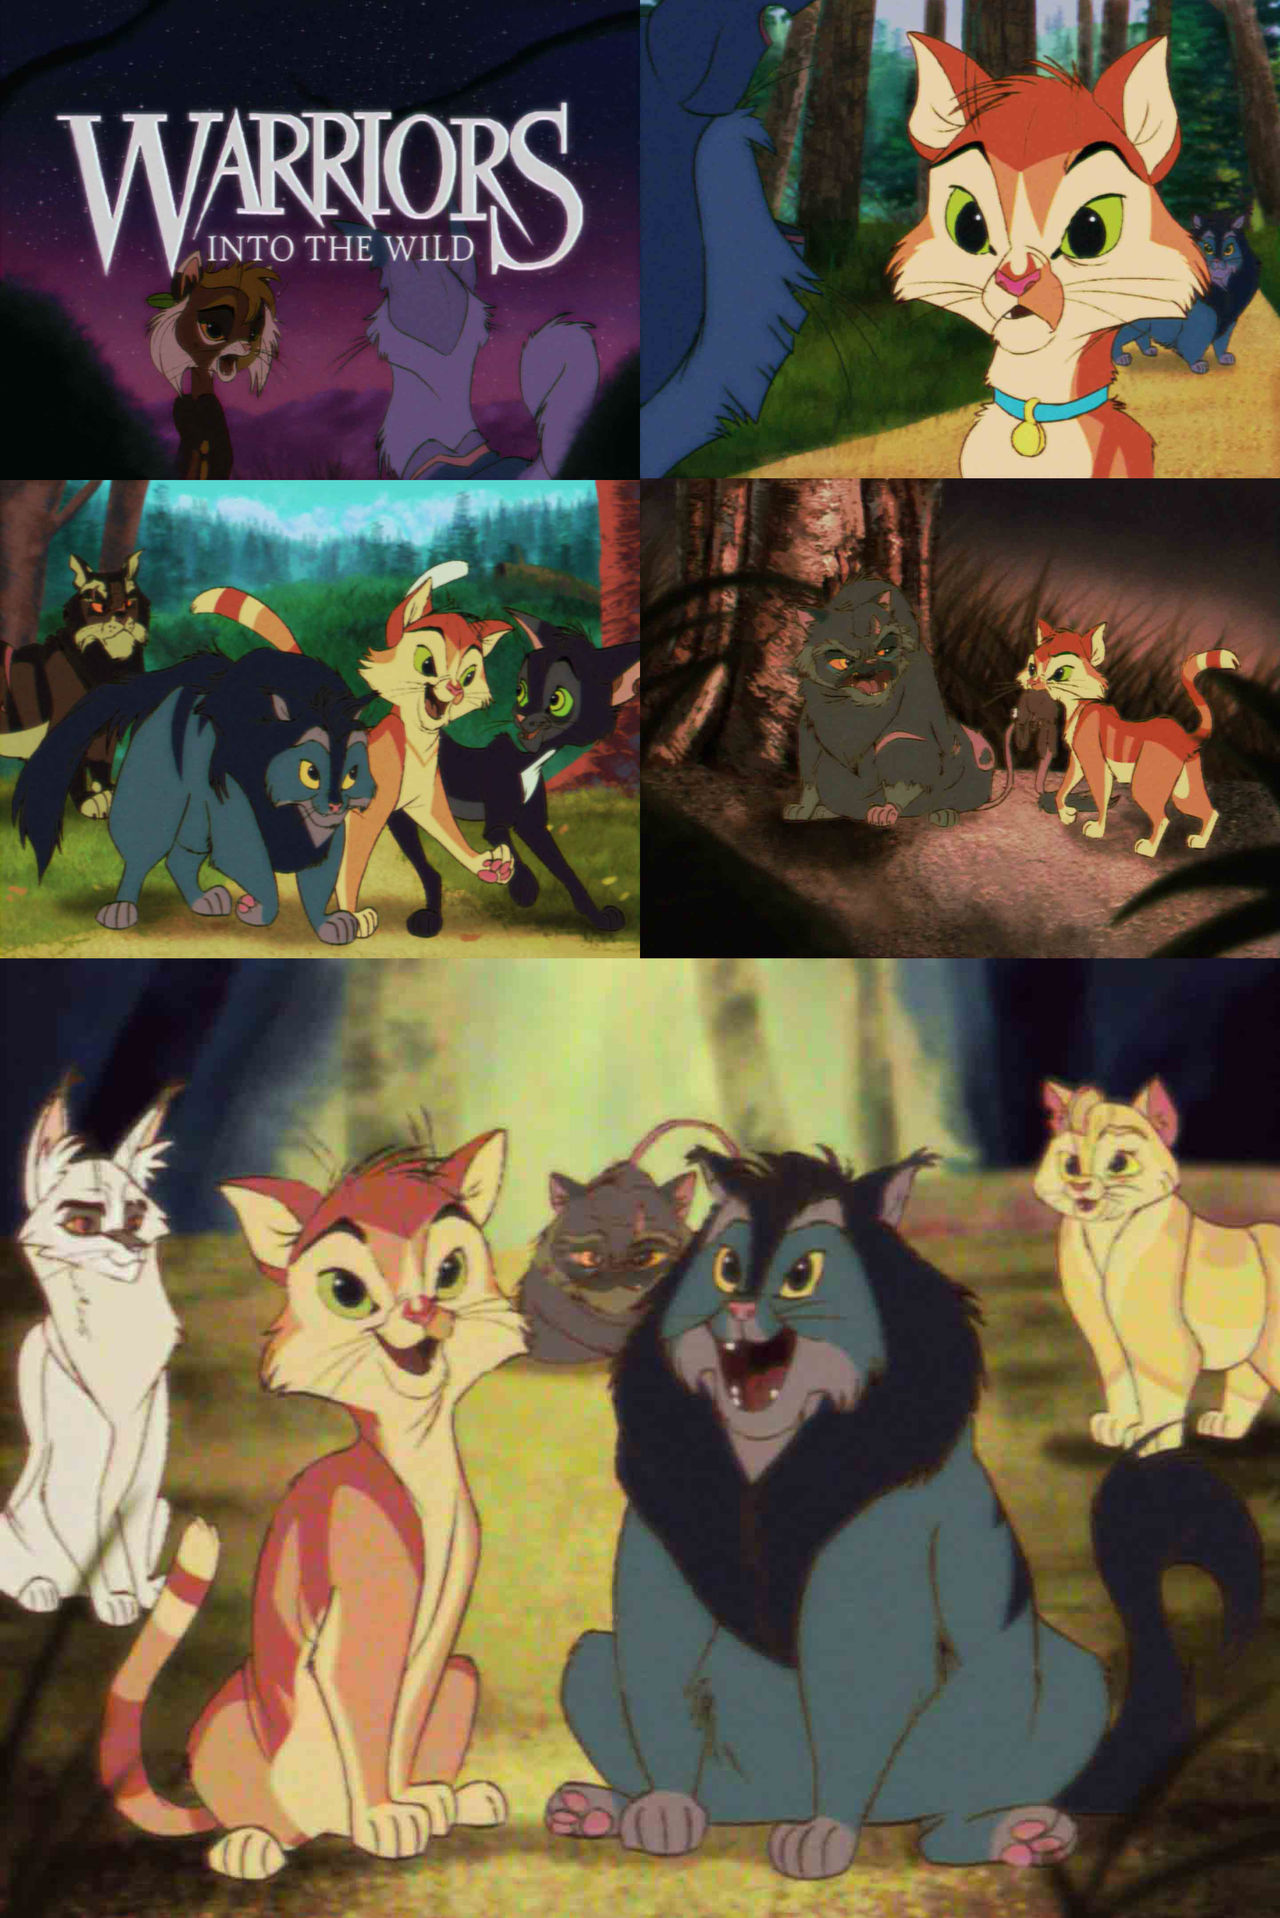 Warrior cats: Into the wild movie poster by Spottedfern13 on DeviantArt